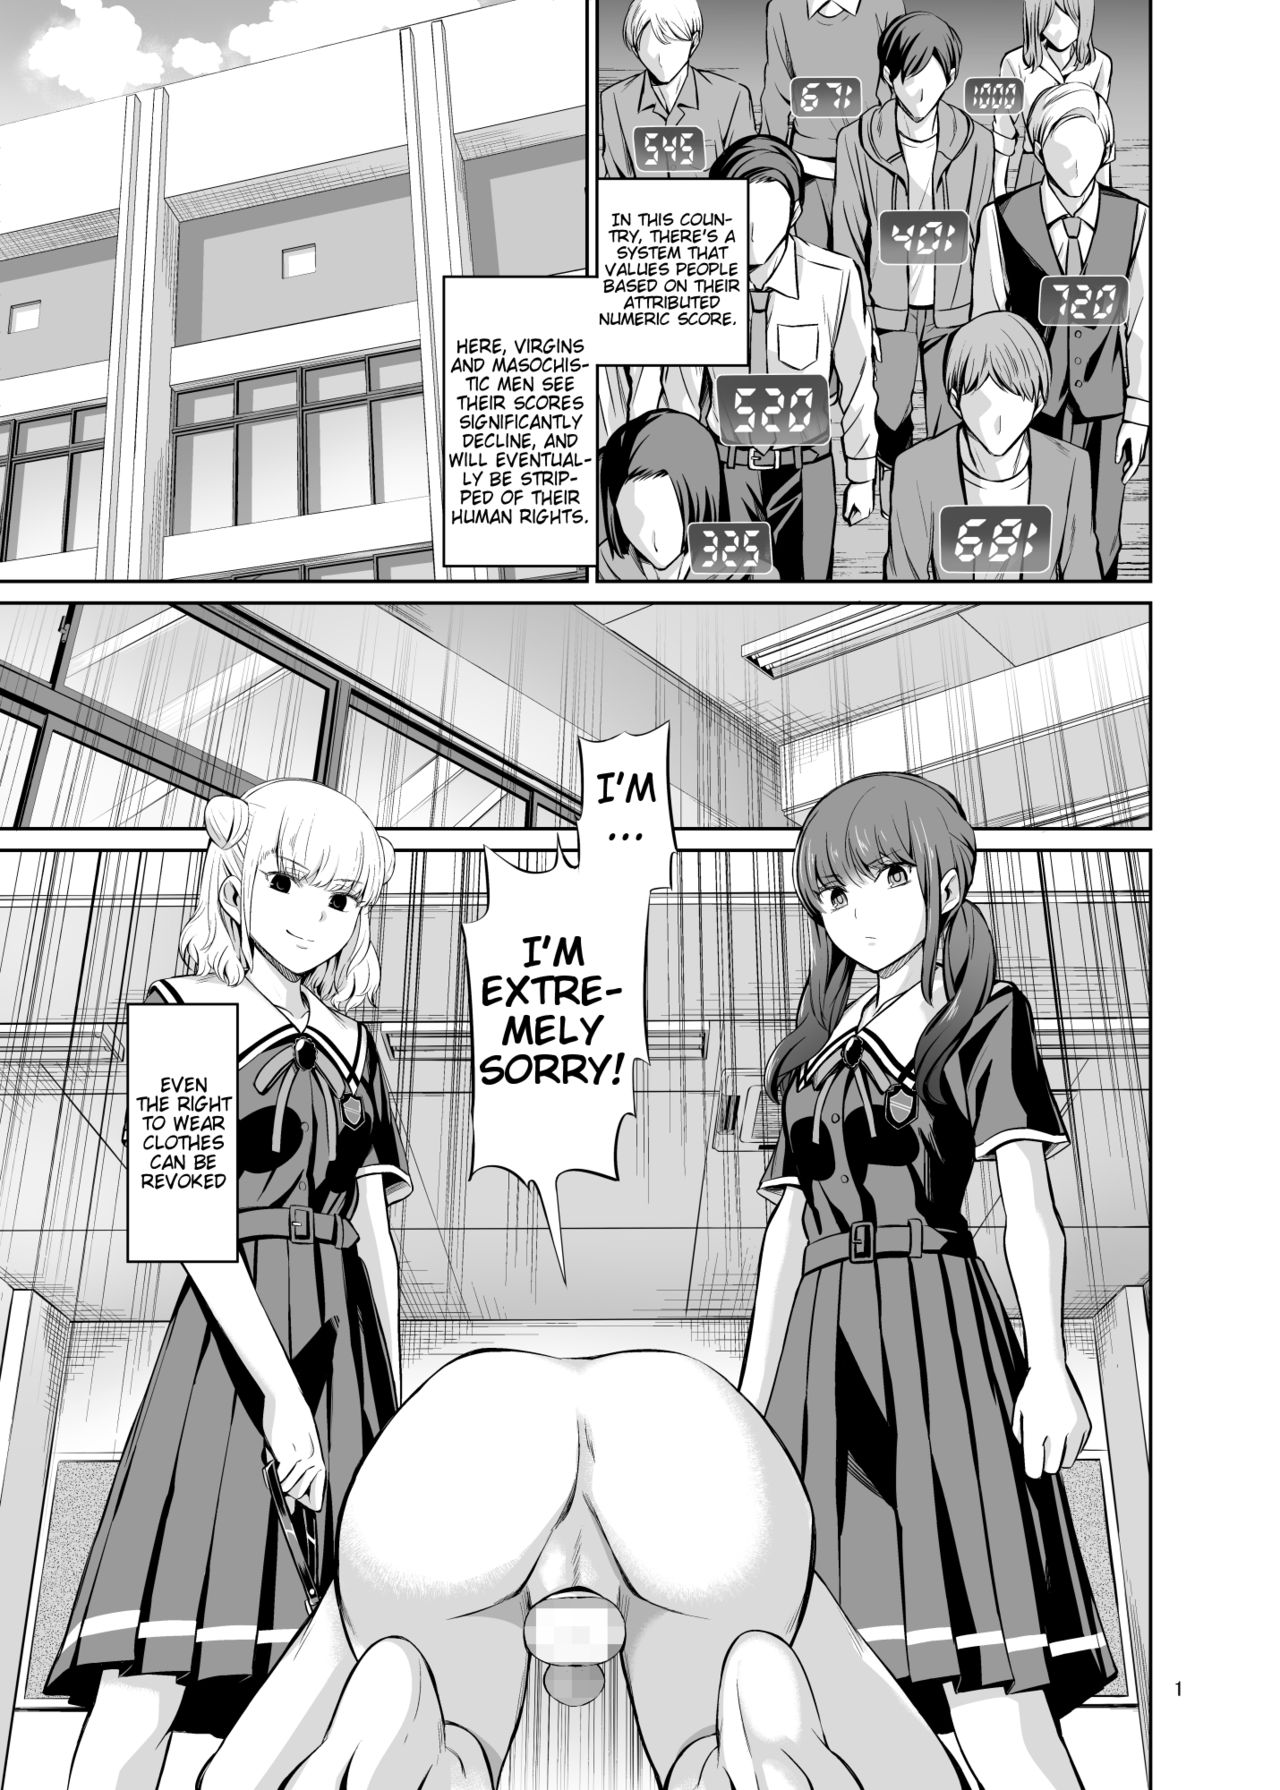 [Yamahata Rian] Tensuushugi no Kuni Kouhen | A Country Based on Point System Sequel [English] [Esoteric_Autist, klow82] page 3 full